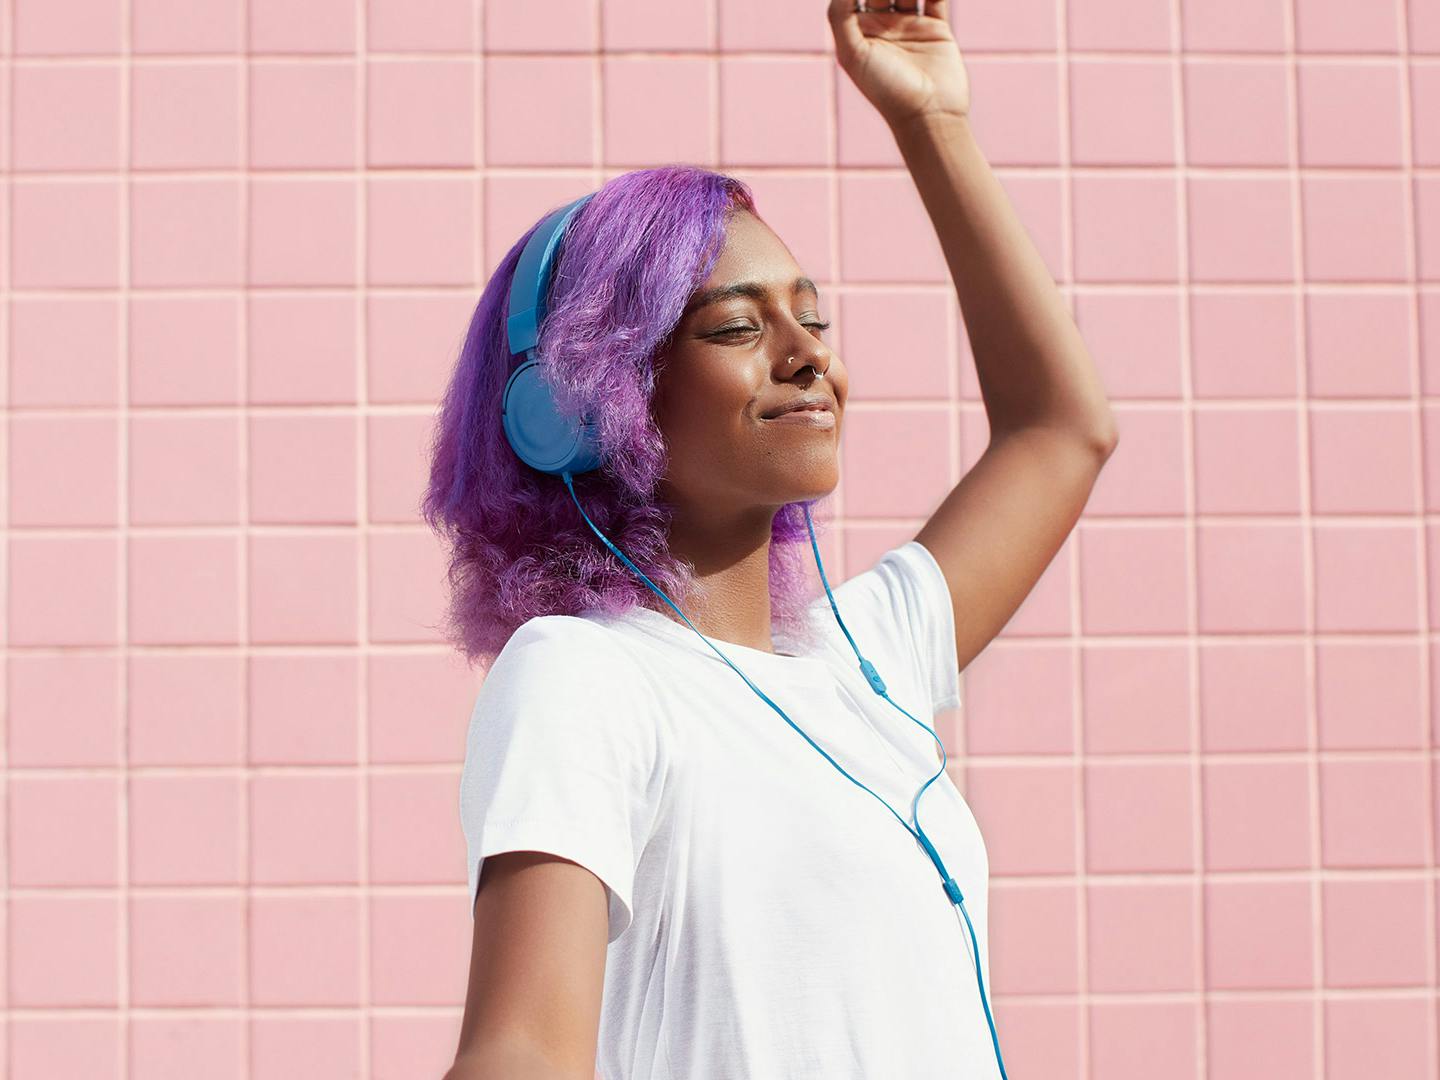 young person with purple hair, blue headphones and a white tee dances against a pink tiled background